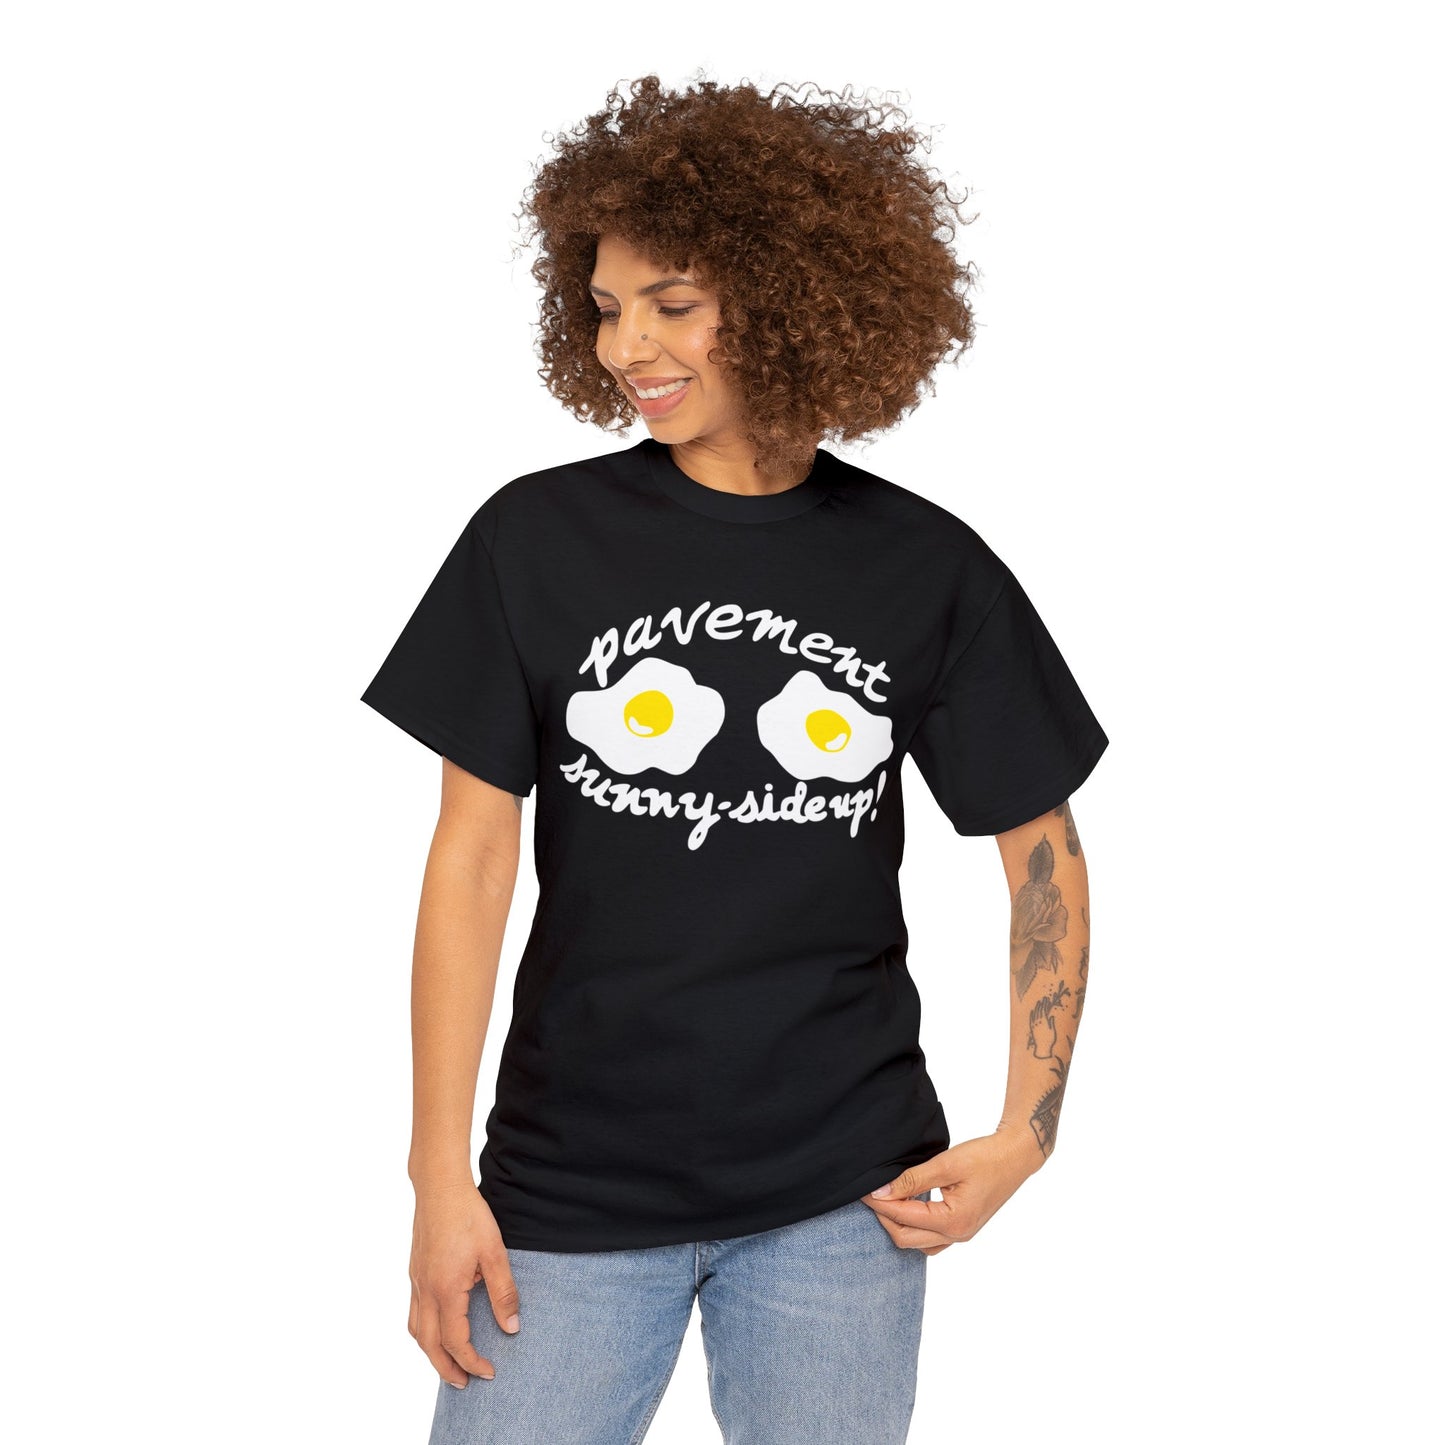 Art Pavement Band Sunny Side Up DEATH STOCK T-shirt for Sale